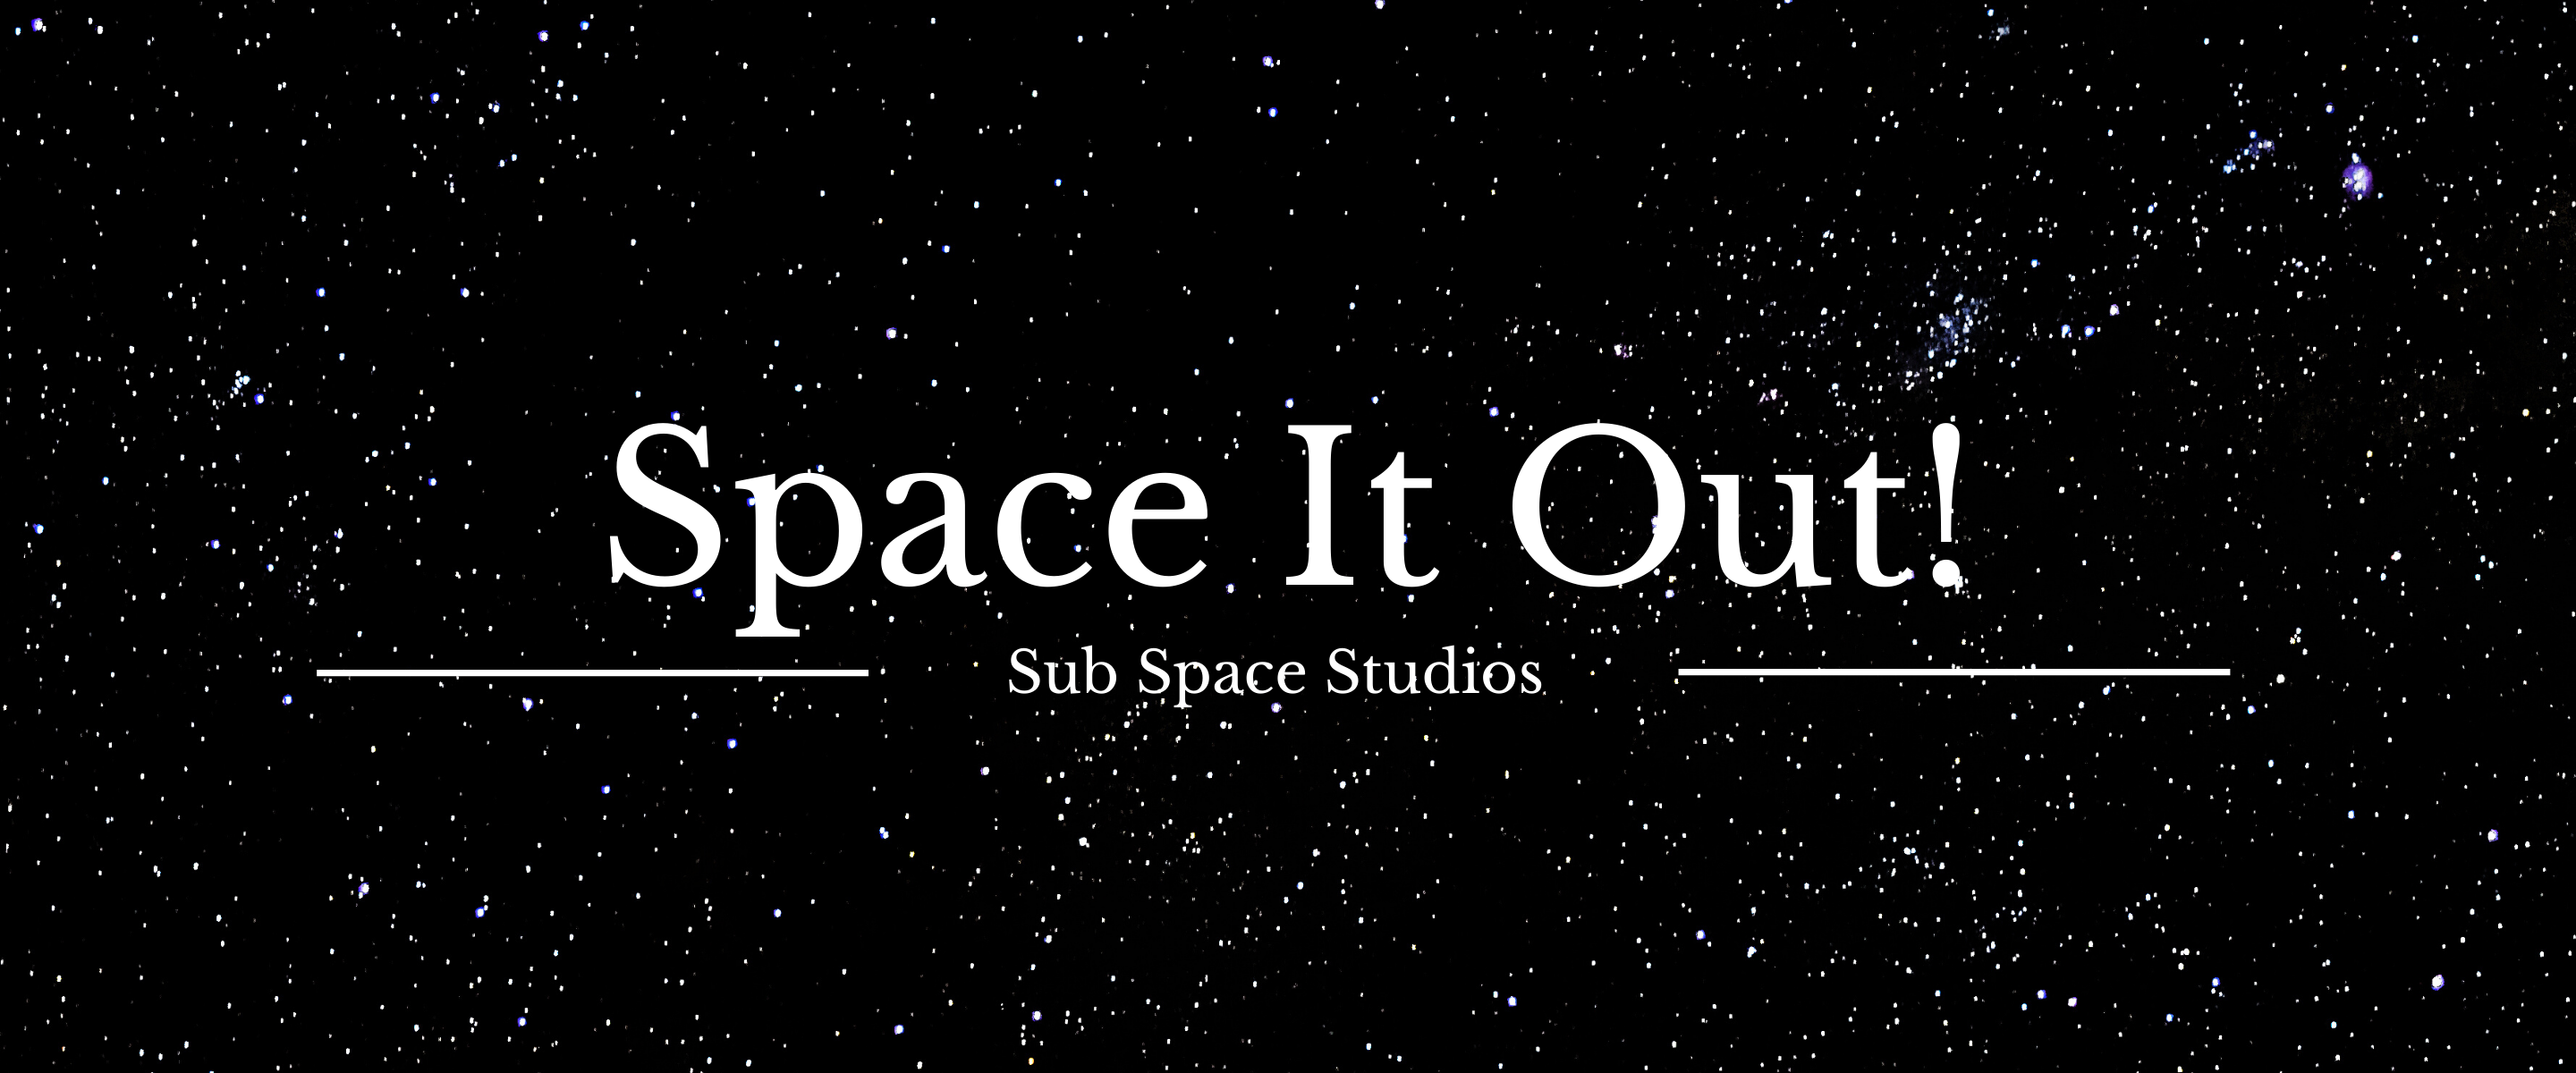 Space it out!